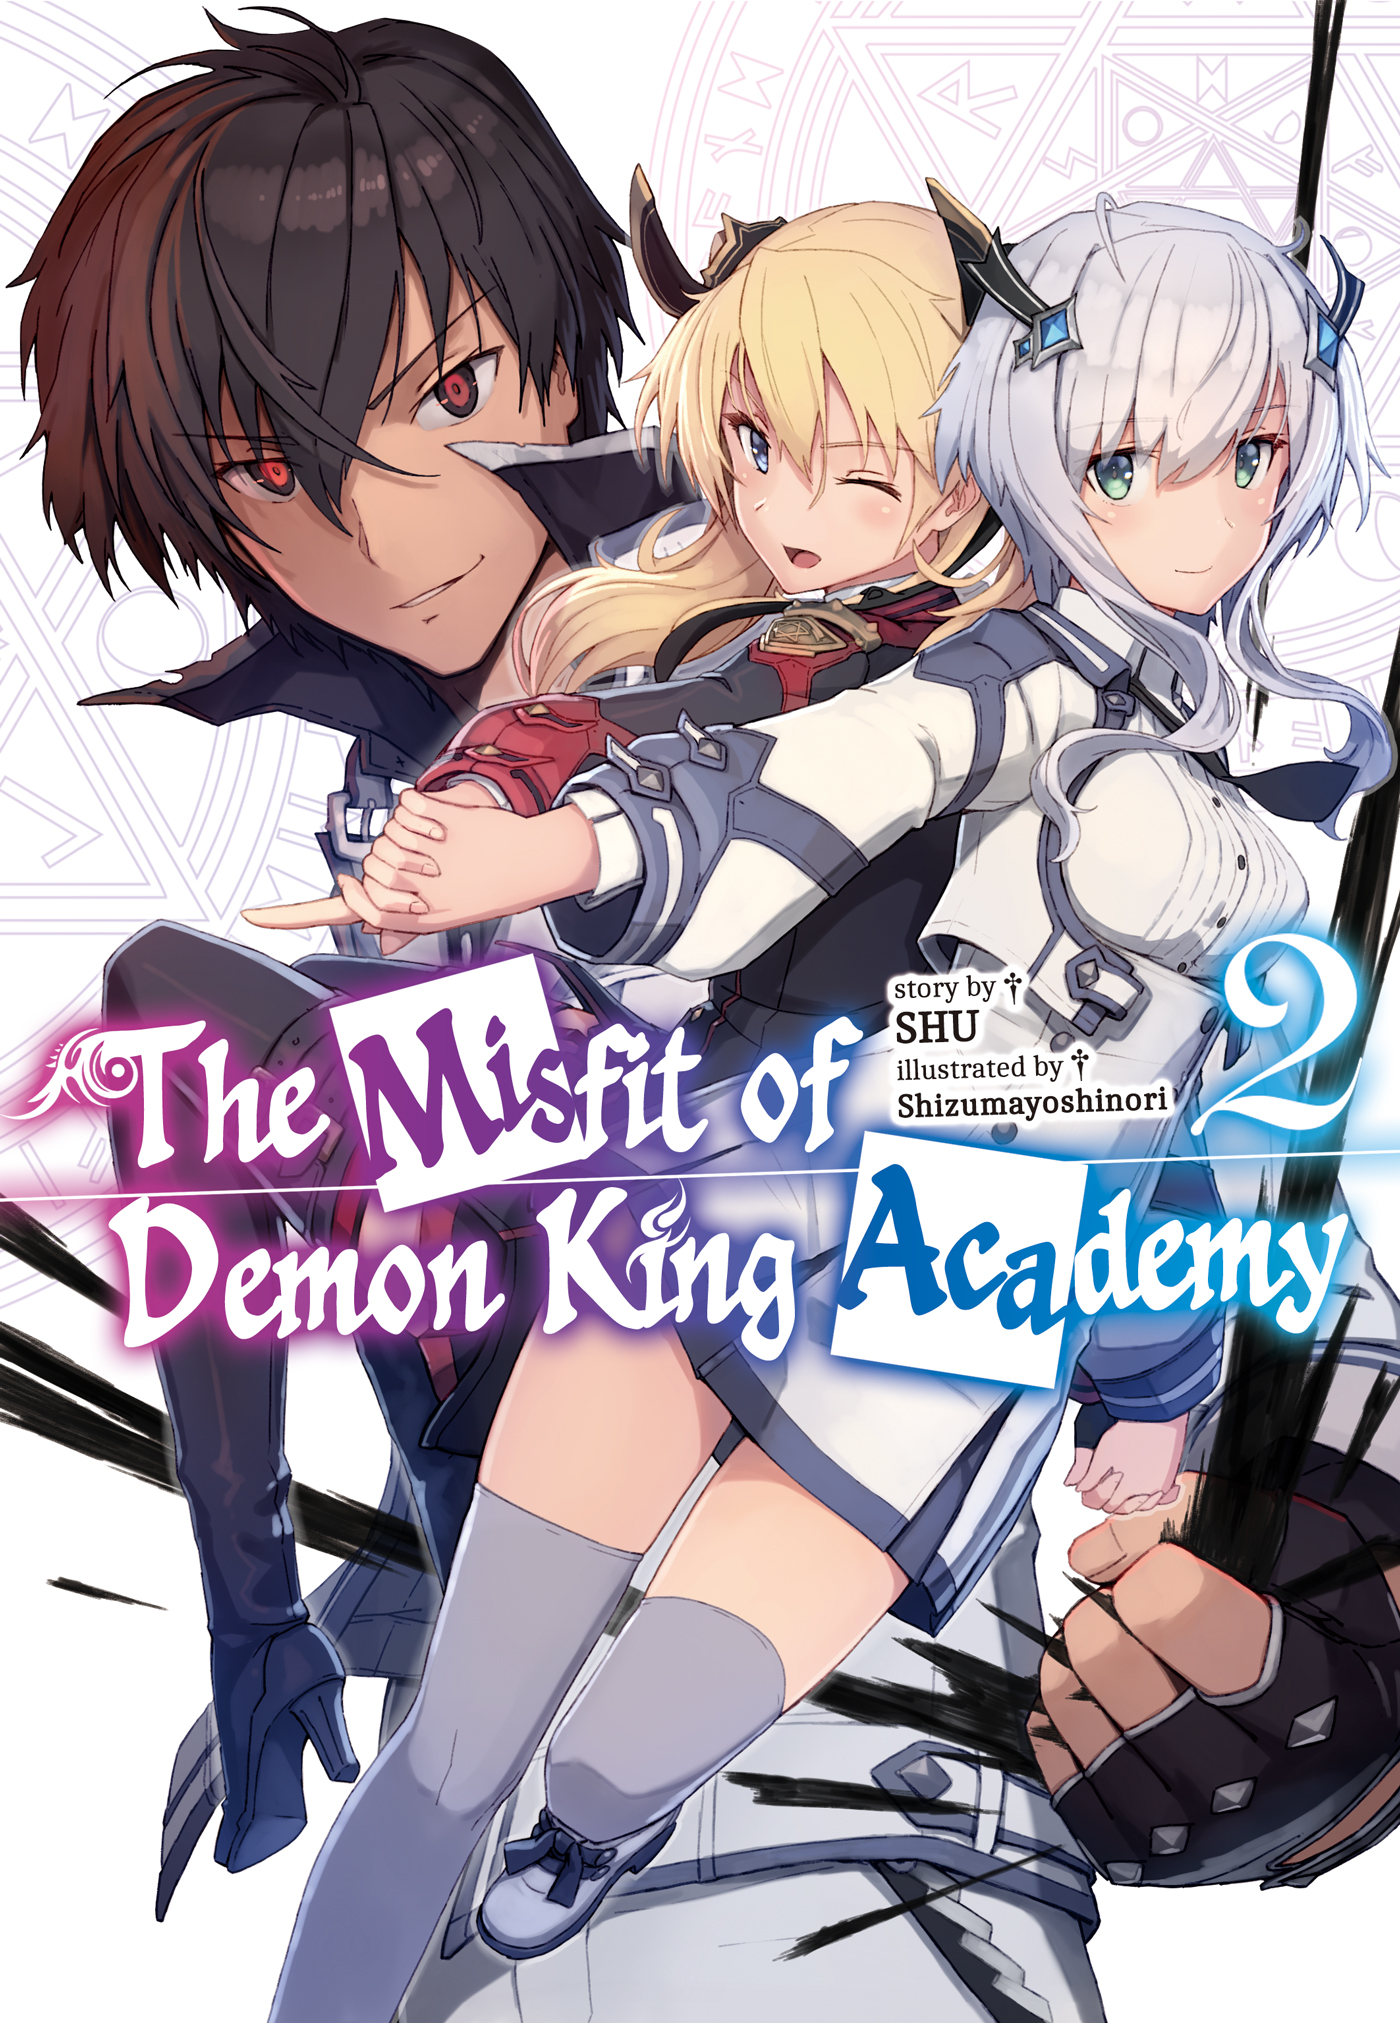 The Misfit of Demon King Academy II Maou Gakuin no Futekigousha Cool Black  and White Silhouette Anime Characters : Anos Voldigoad with His Japanese